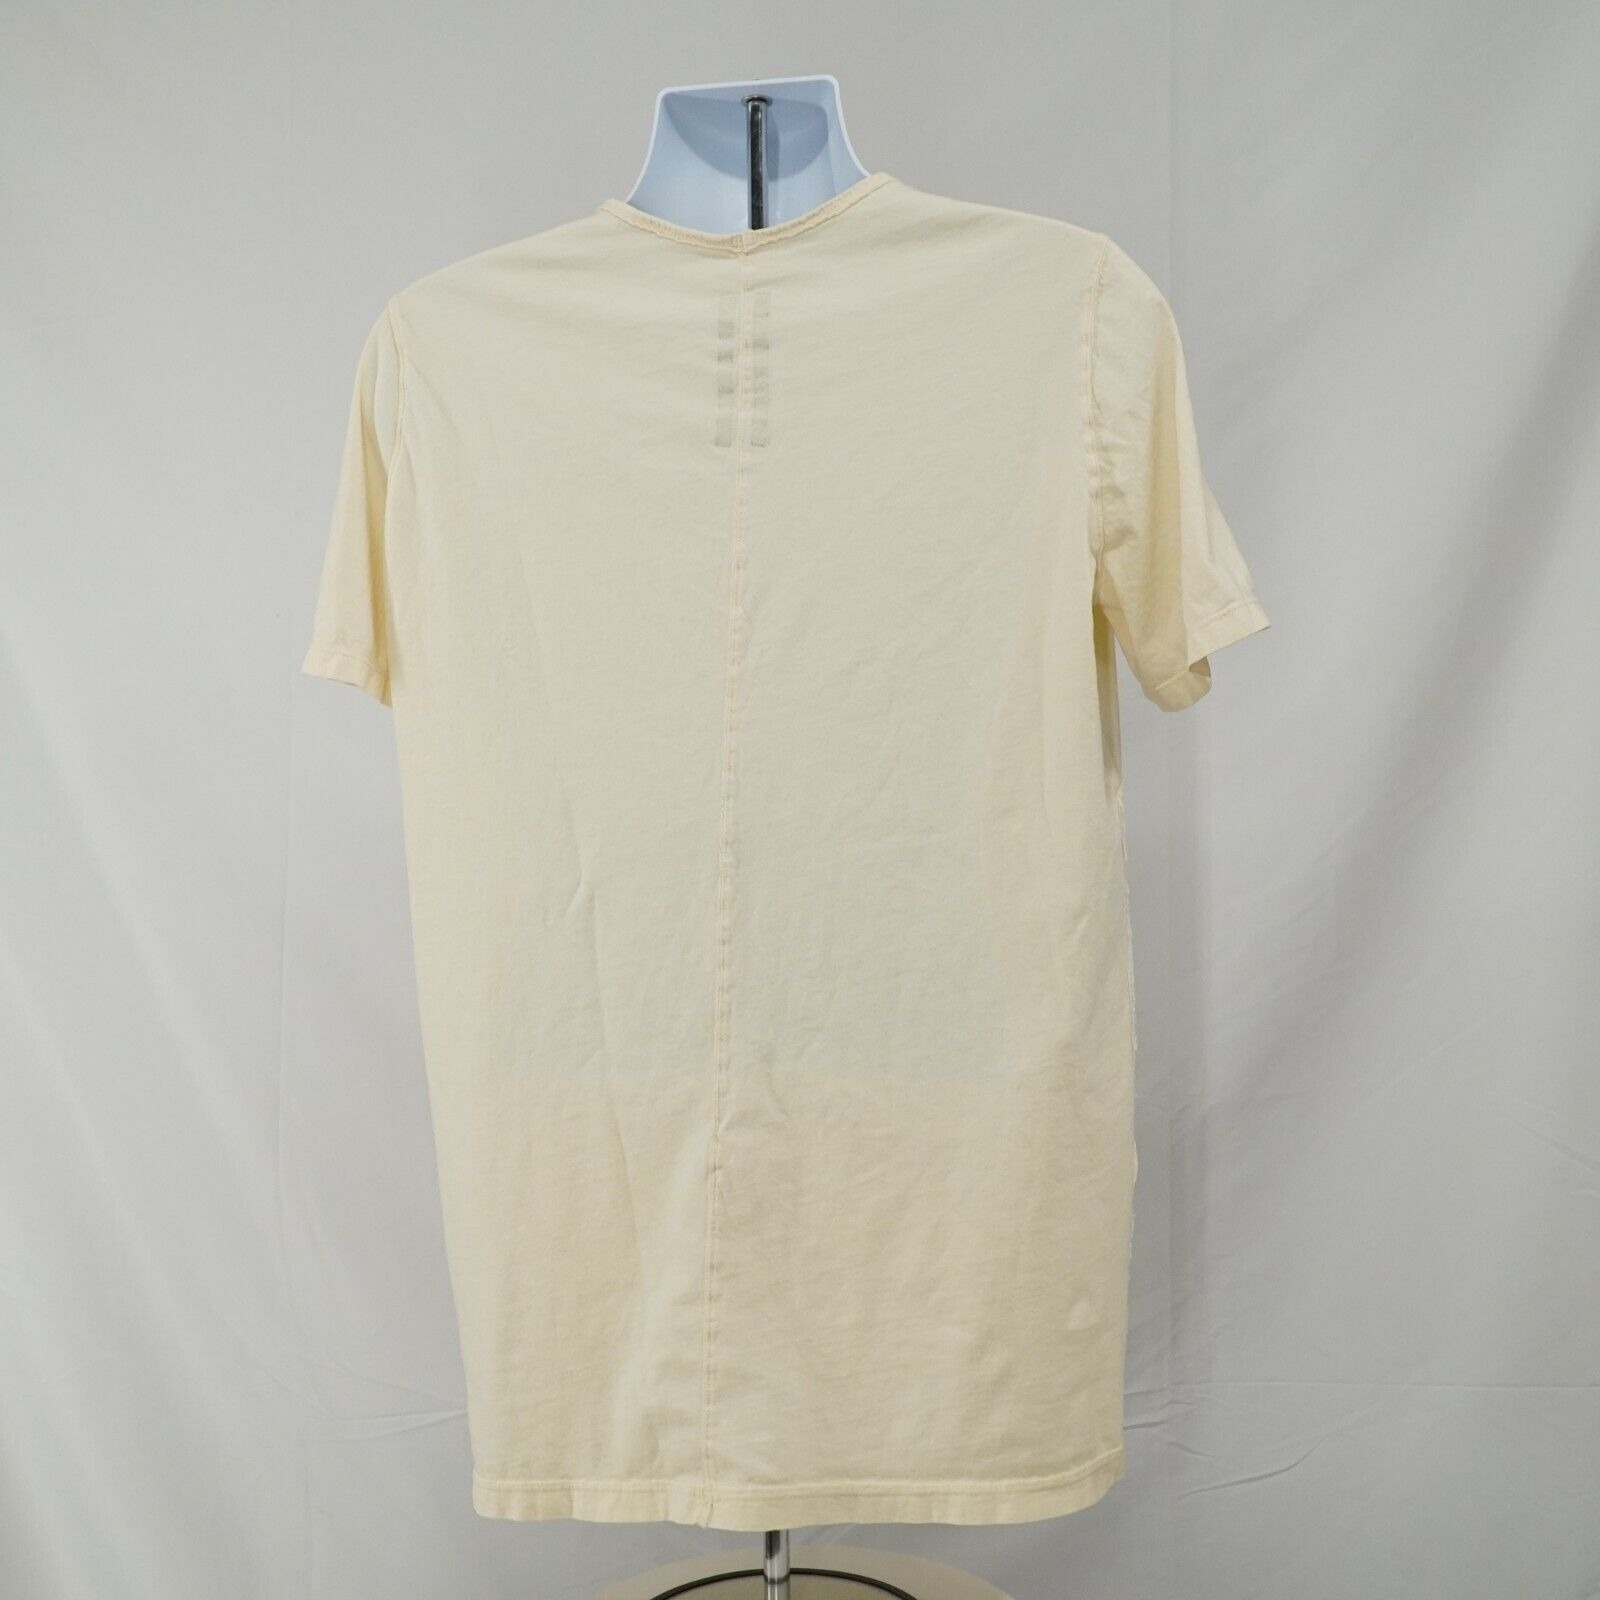 DRKSDHW Patched Level Tee Milk White Cotton - Lar - 16